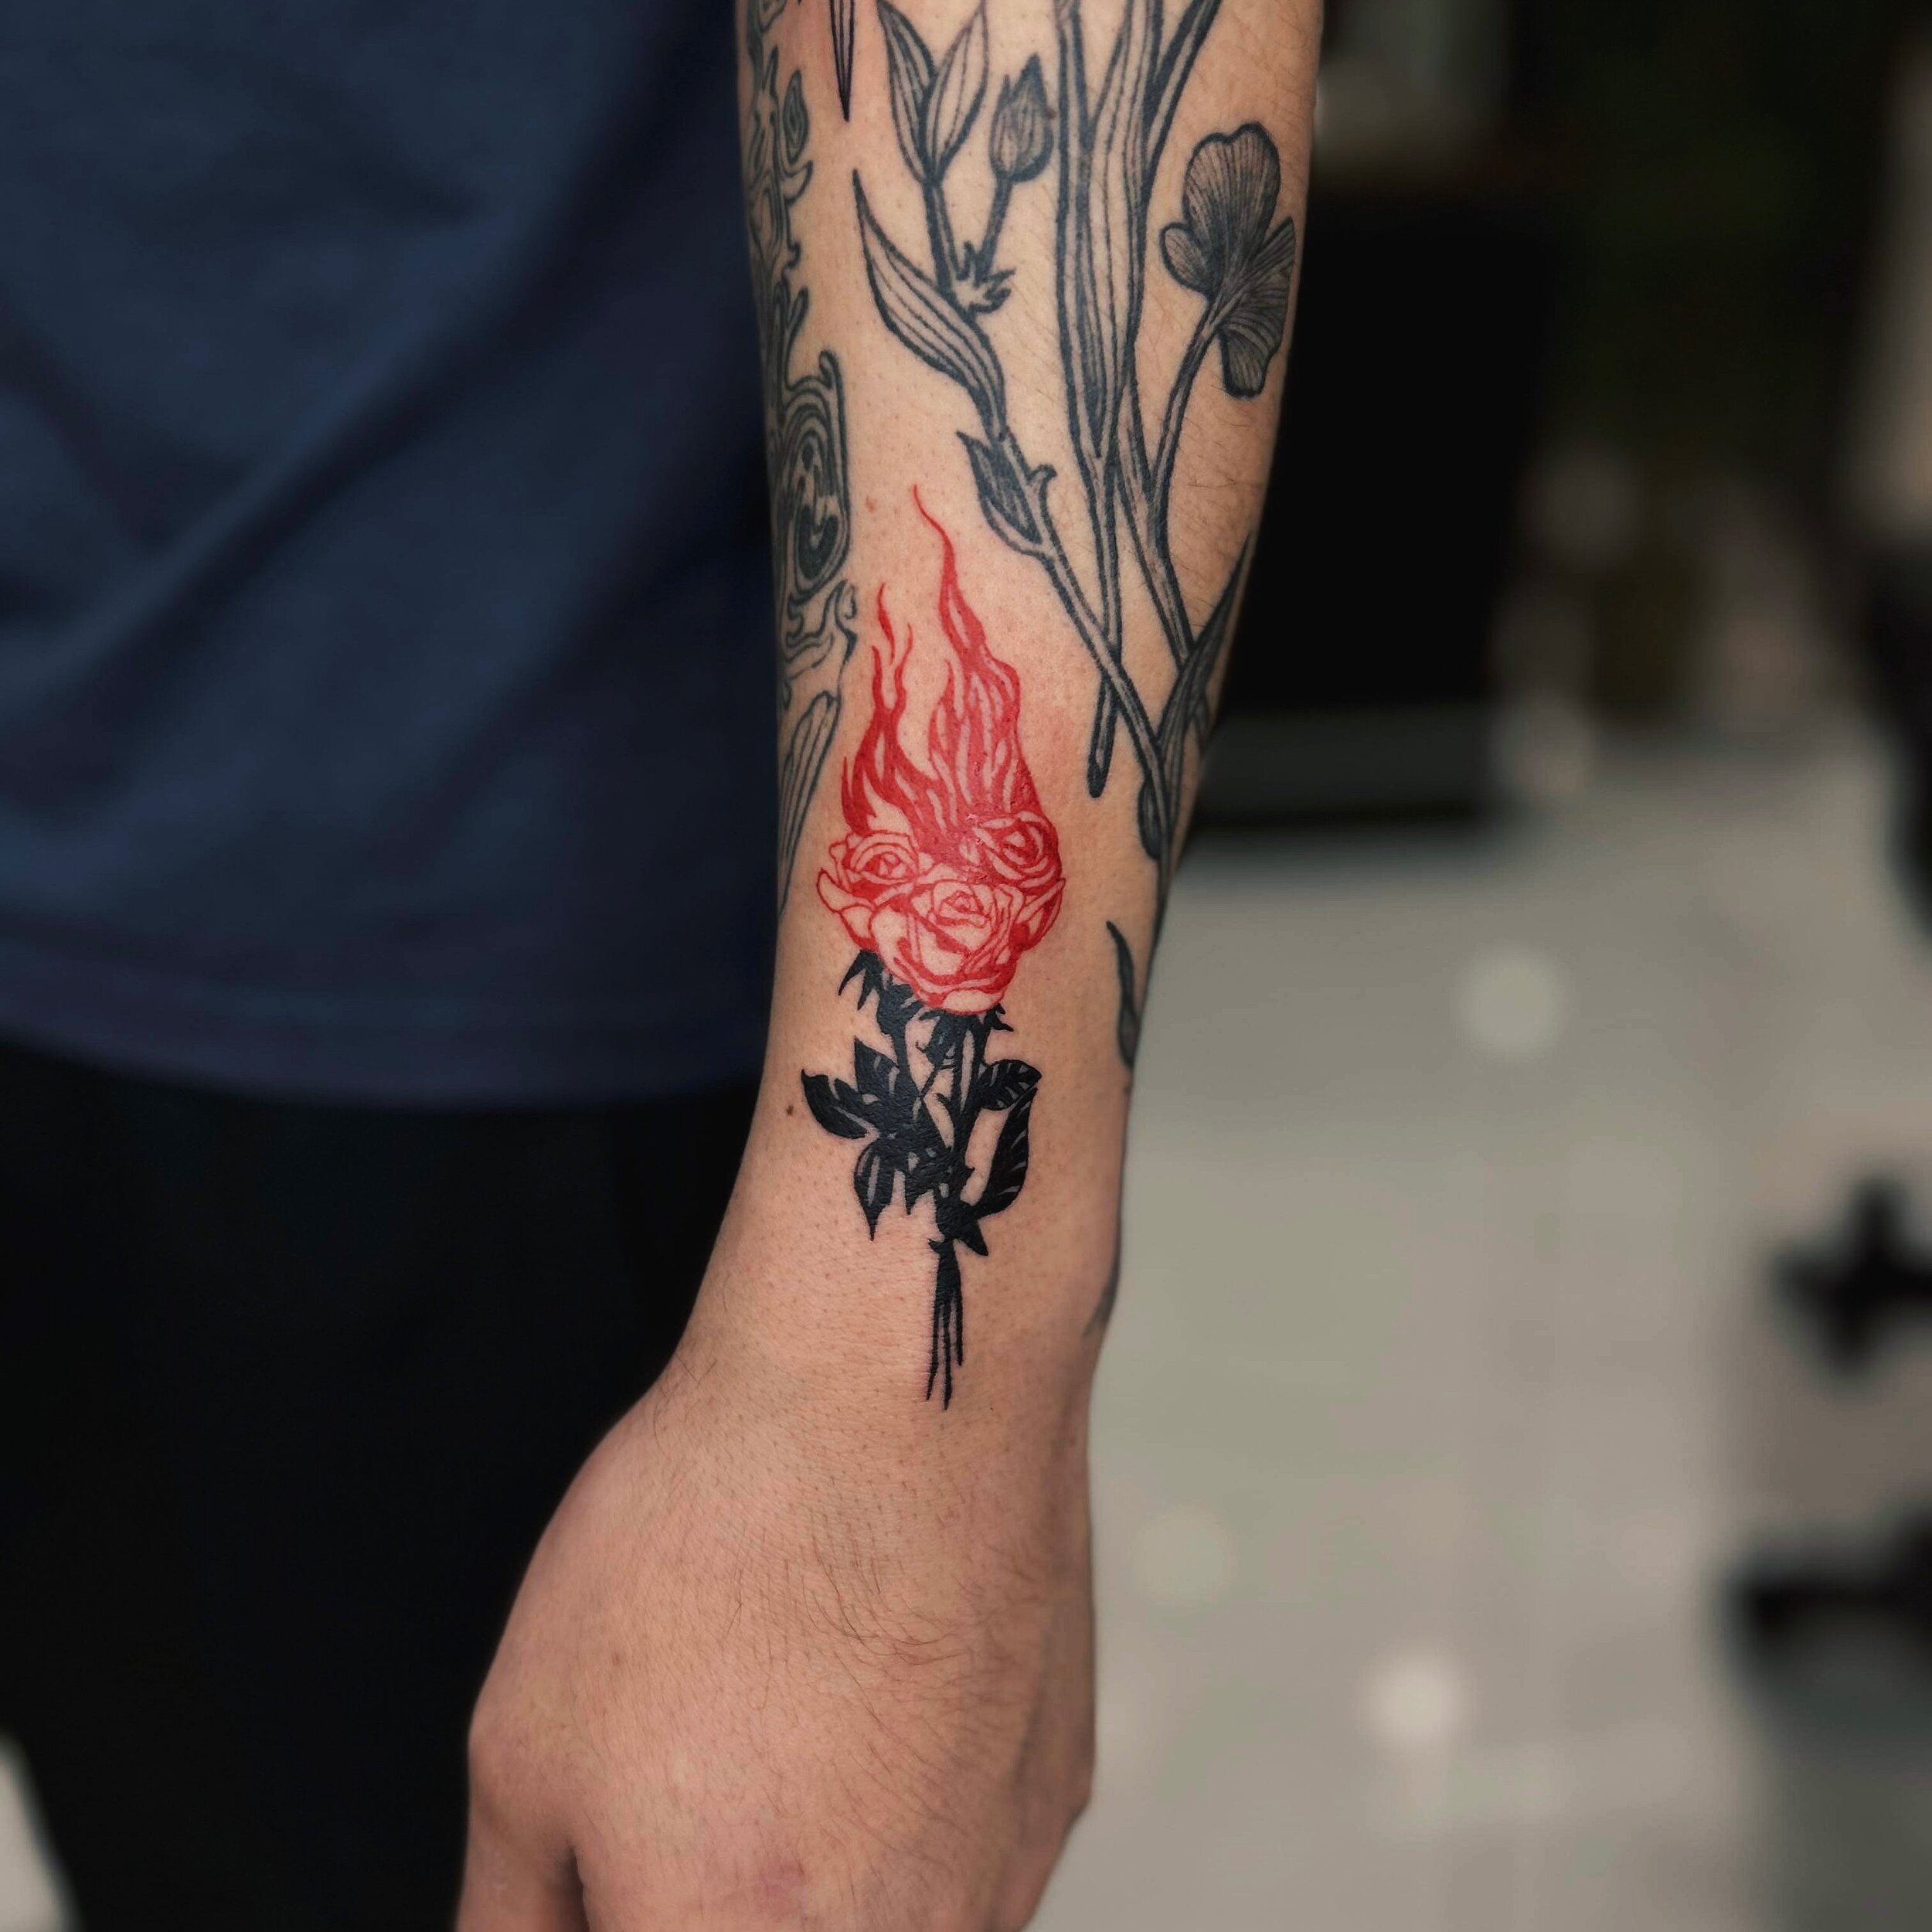 Here&rsquo;s some flame roses to kickstart your Monday 🥀 Done by Cams 😮&zwj;💨 | @camsmerino.tattoos 

#squiresink #goldcoast #2024 #surfersparadise #tattoo #tattooparlor #tattoostudio #ink #inked @pirattattoo #pirattattoomachine #tattooartist #ink